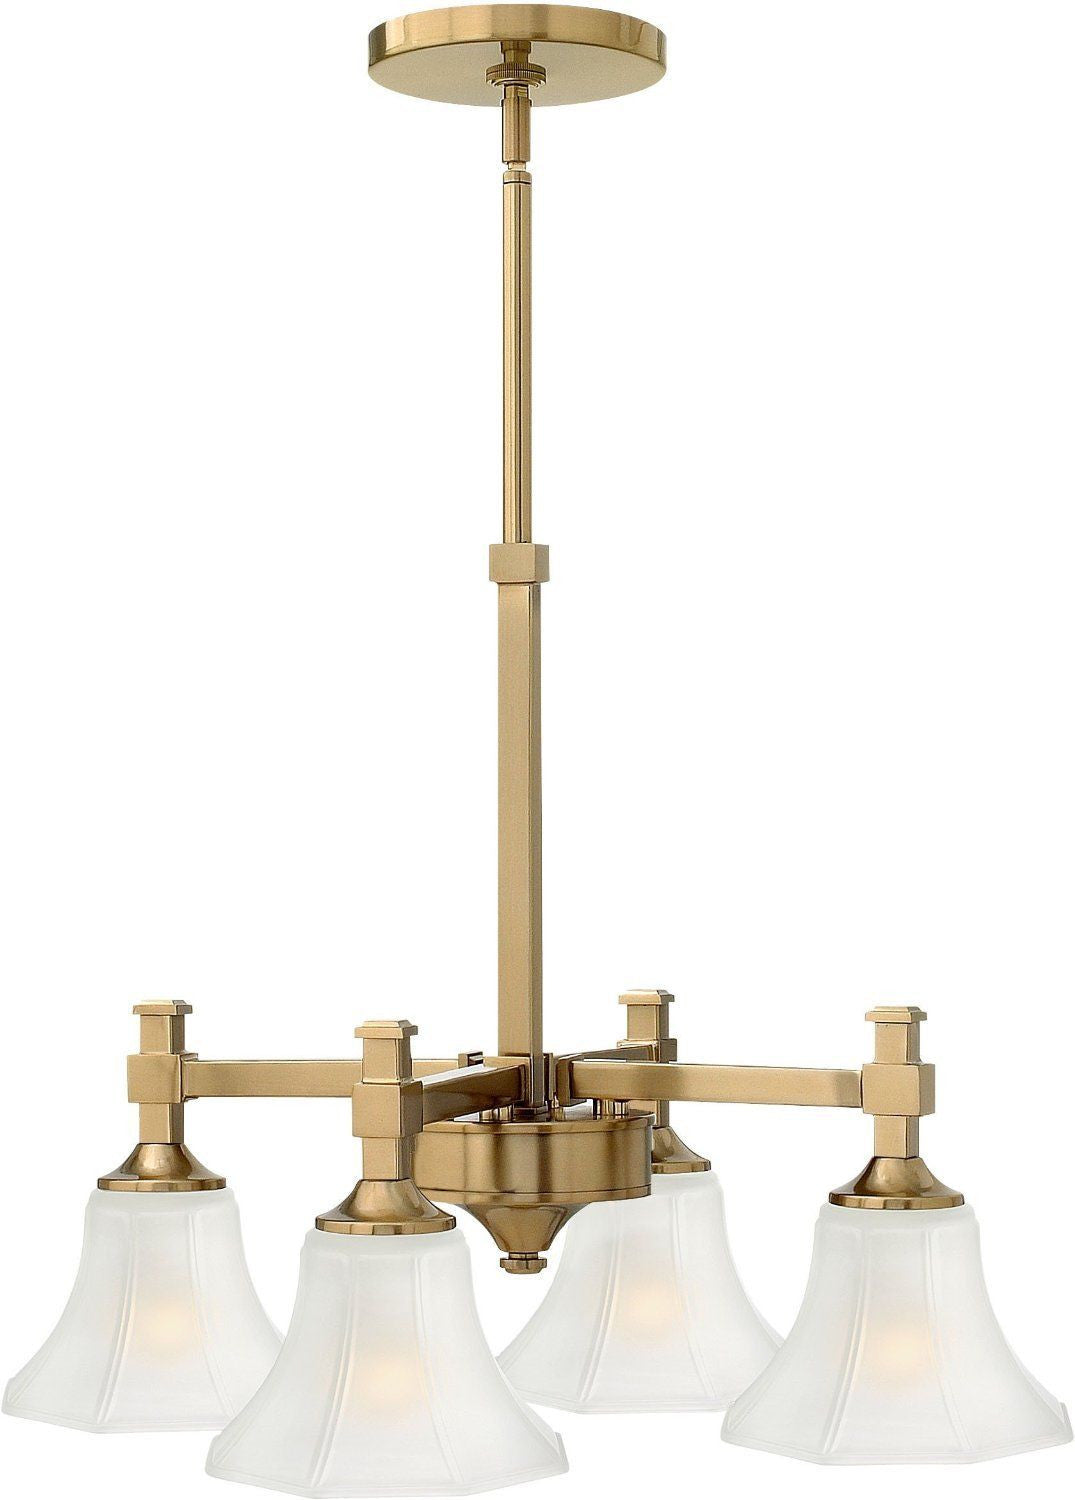 Hinkley Lighting 4044 BC Abbie Collection Four Light Hanging Chandelier in Brushed Caramel Finish